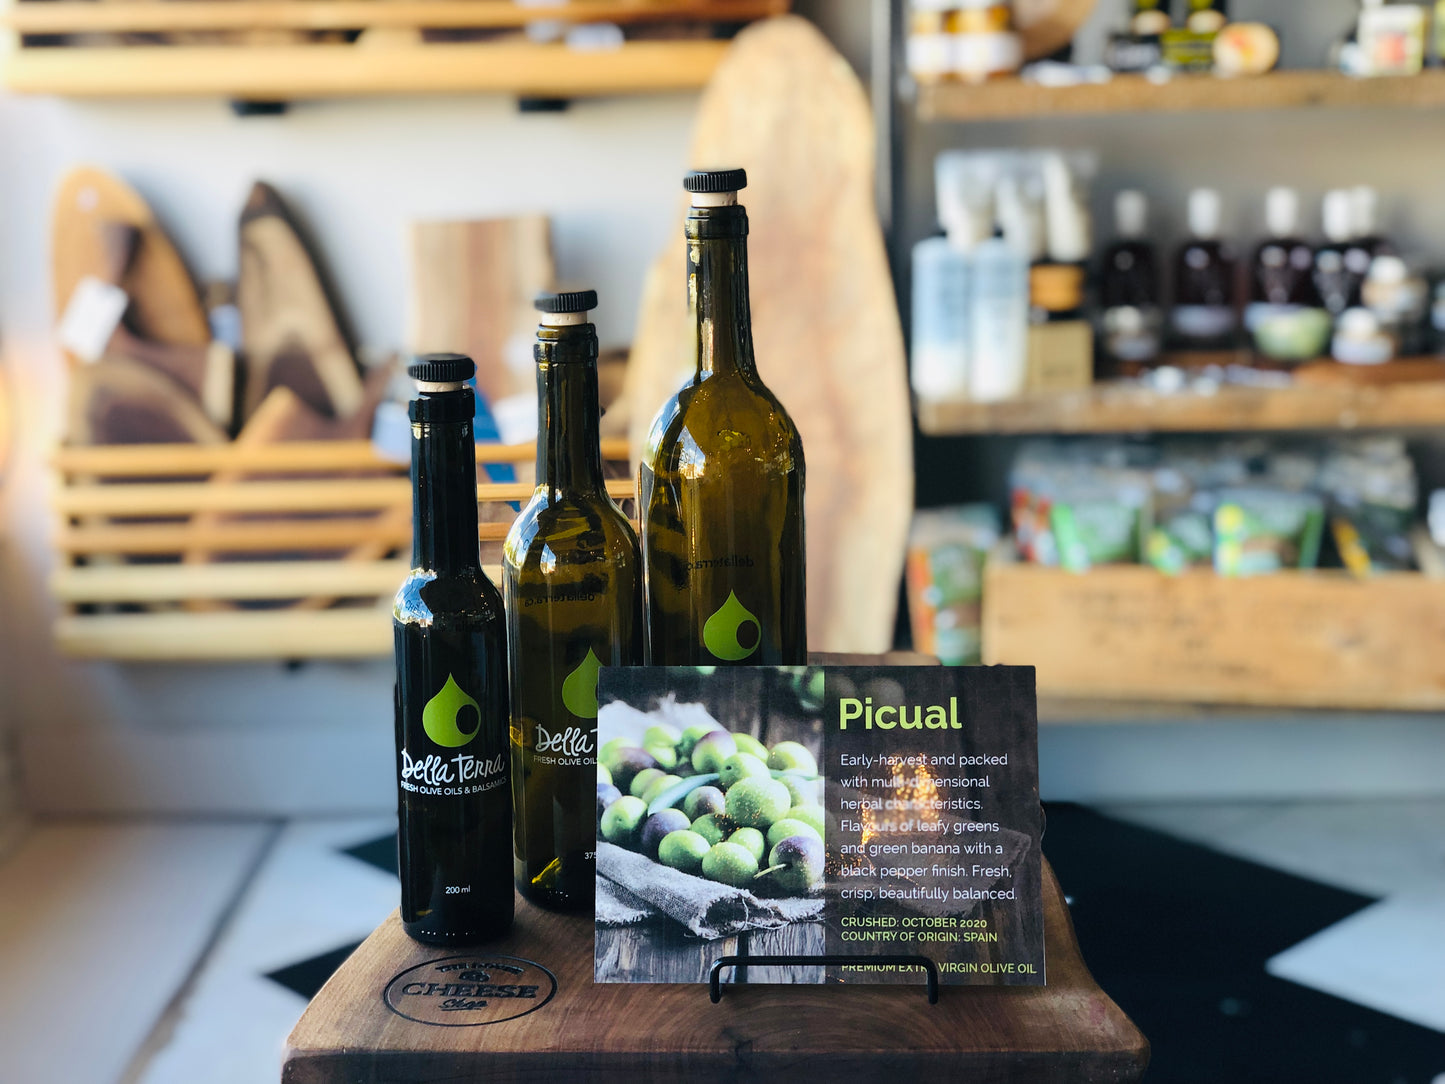 PICUAL EXTRA VIRGIN OLIVE OIL